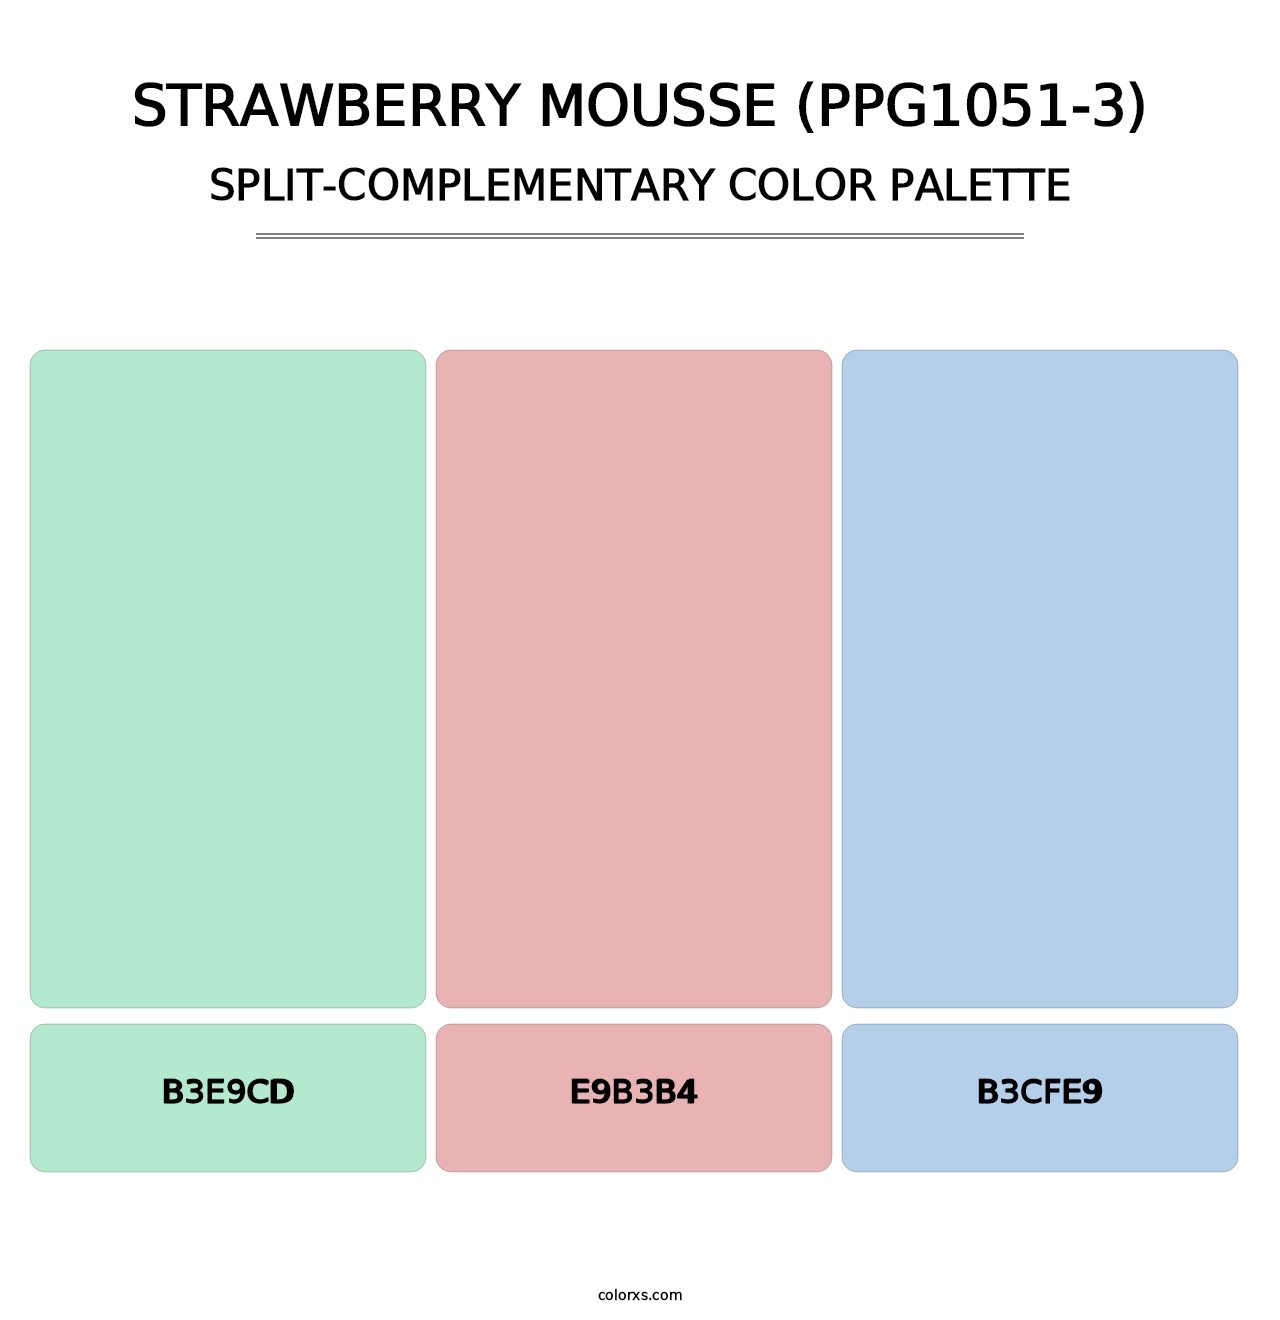 Strawberry Mousse (PPG1051-3) - Split-Complementary Color Palette